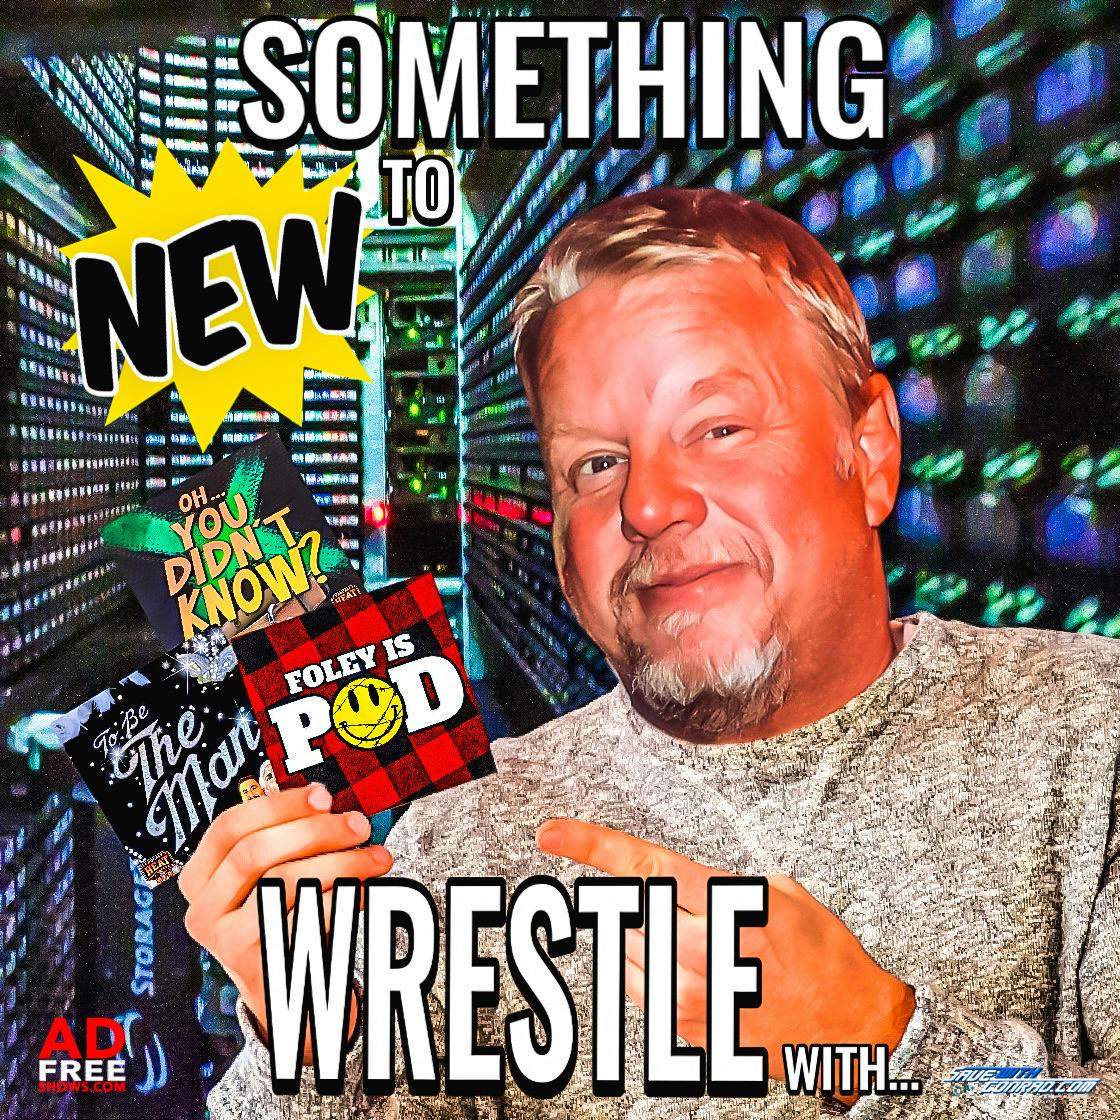 Episode 340: Something NEW To Wrestle With...